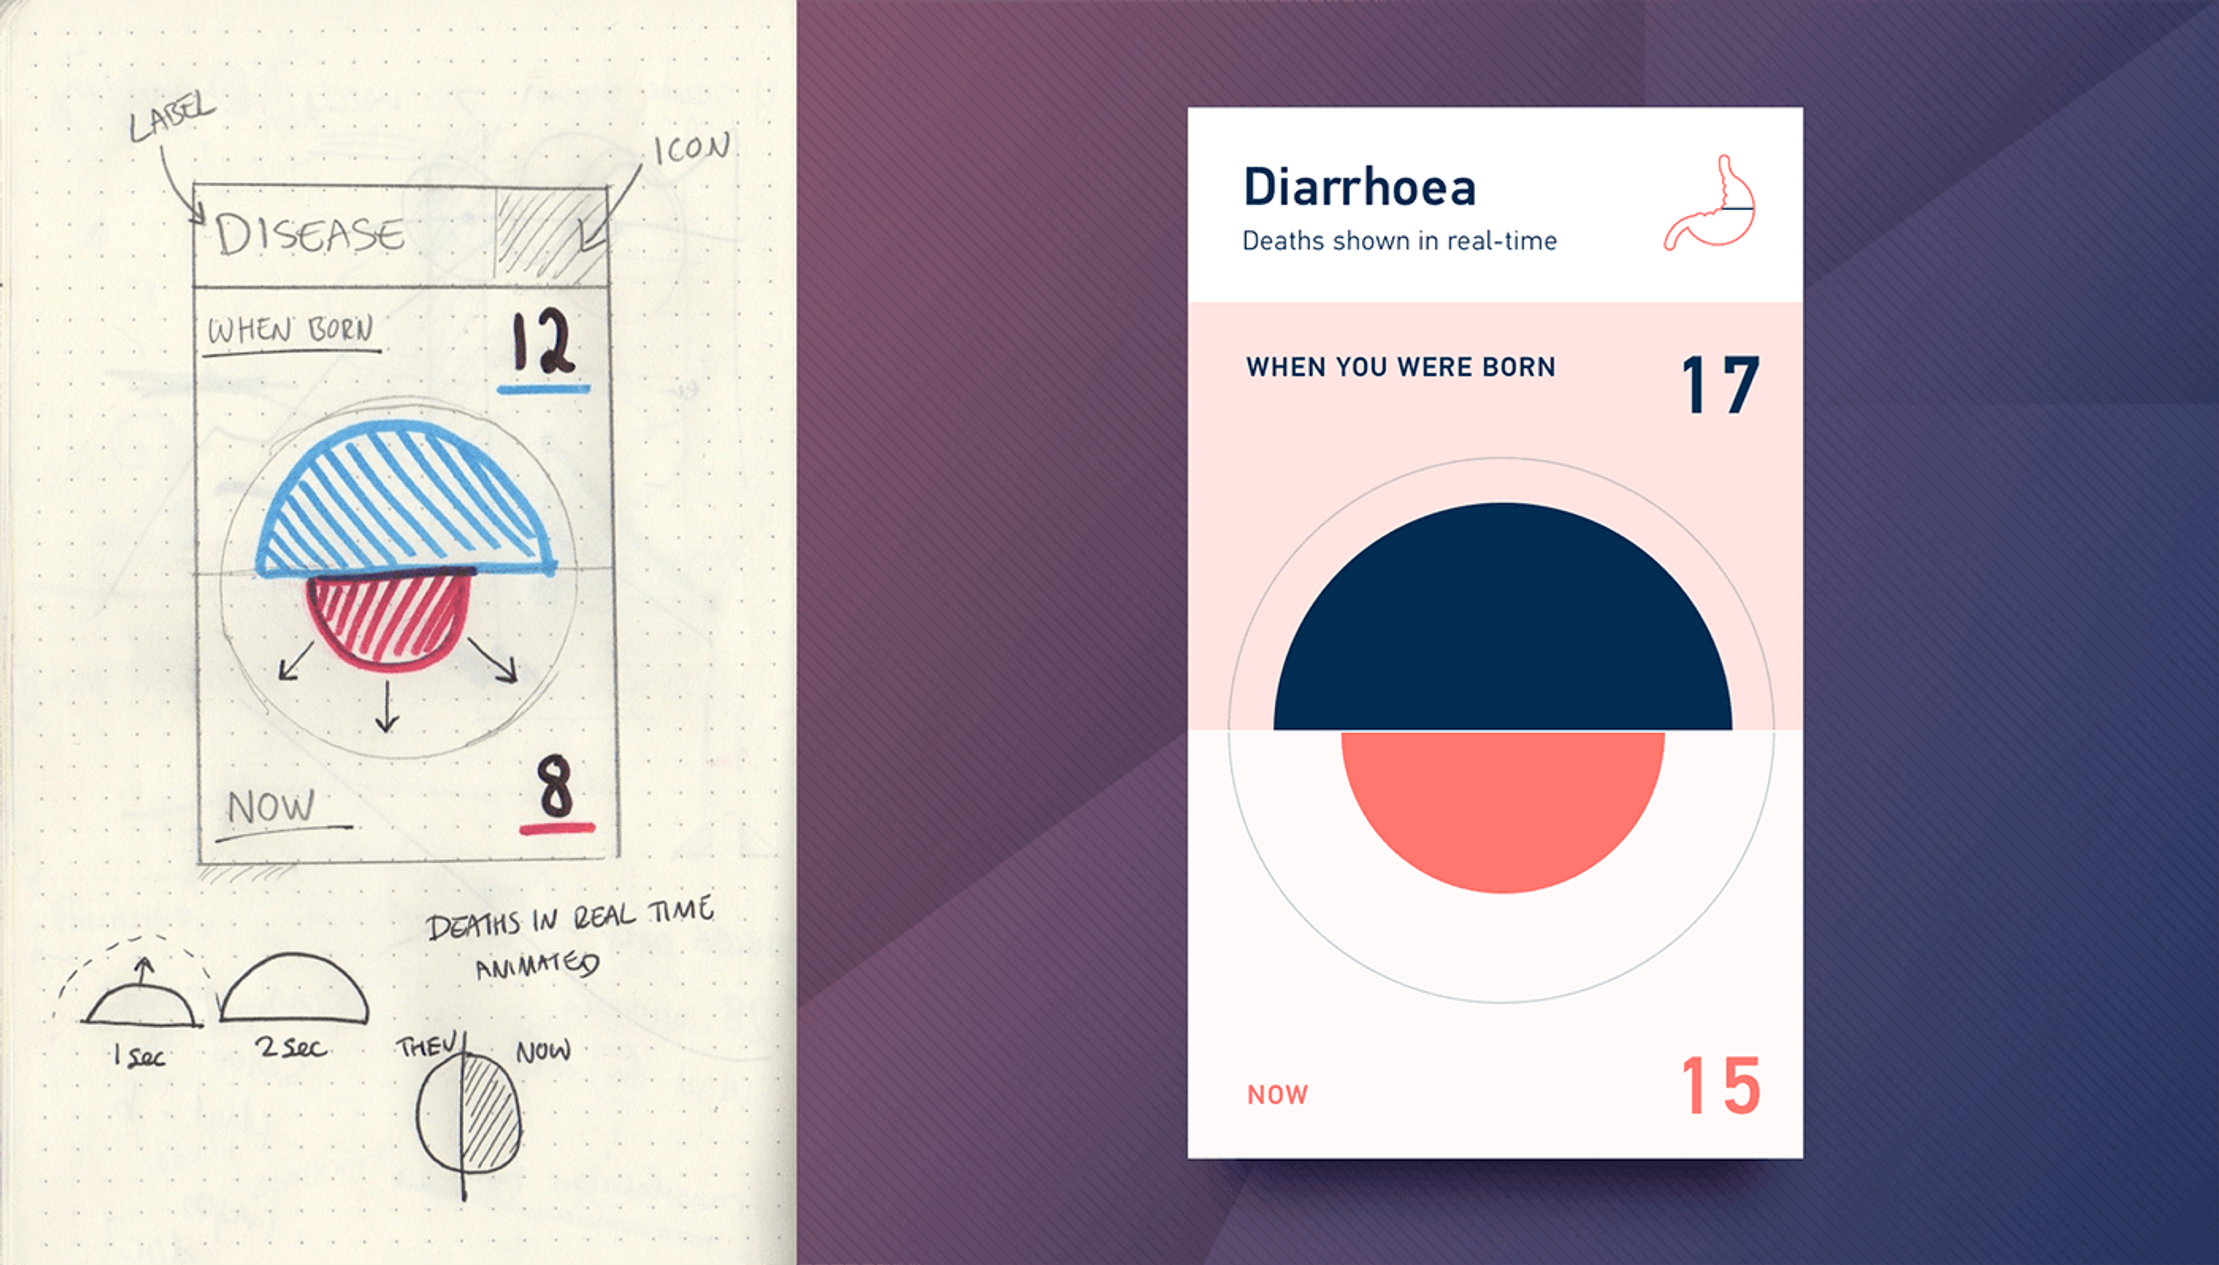 A side-by-side of an initial sketch and final visualization that shows a proportional area chart comparing how diarrhoea deaths have changed between when a person was born and the present day.